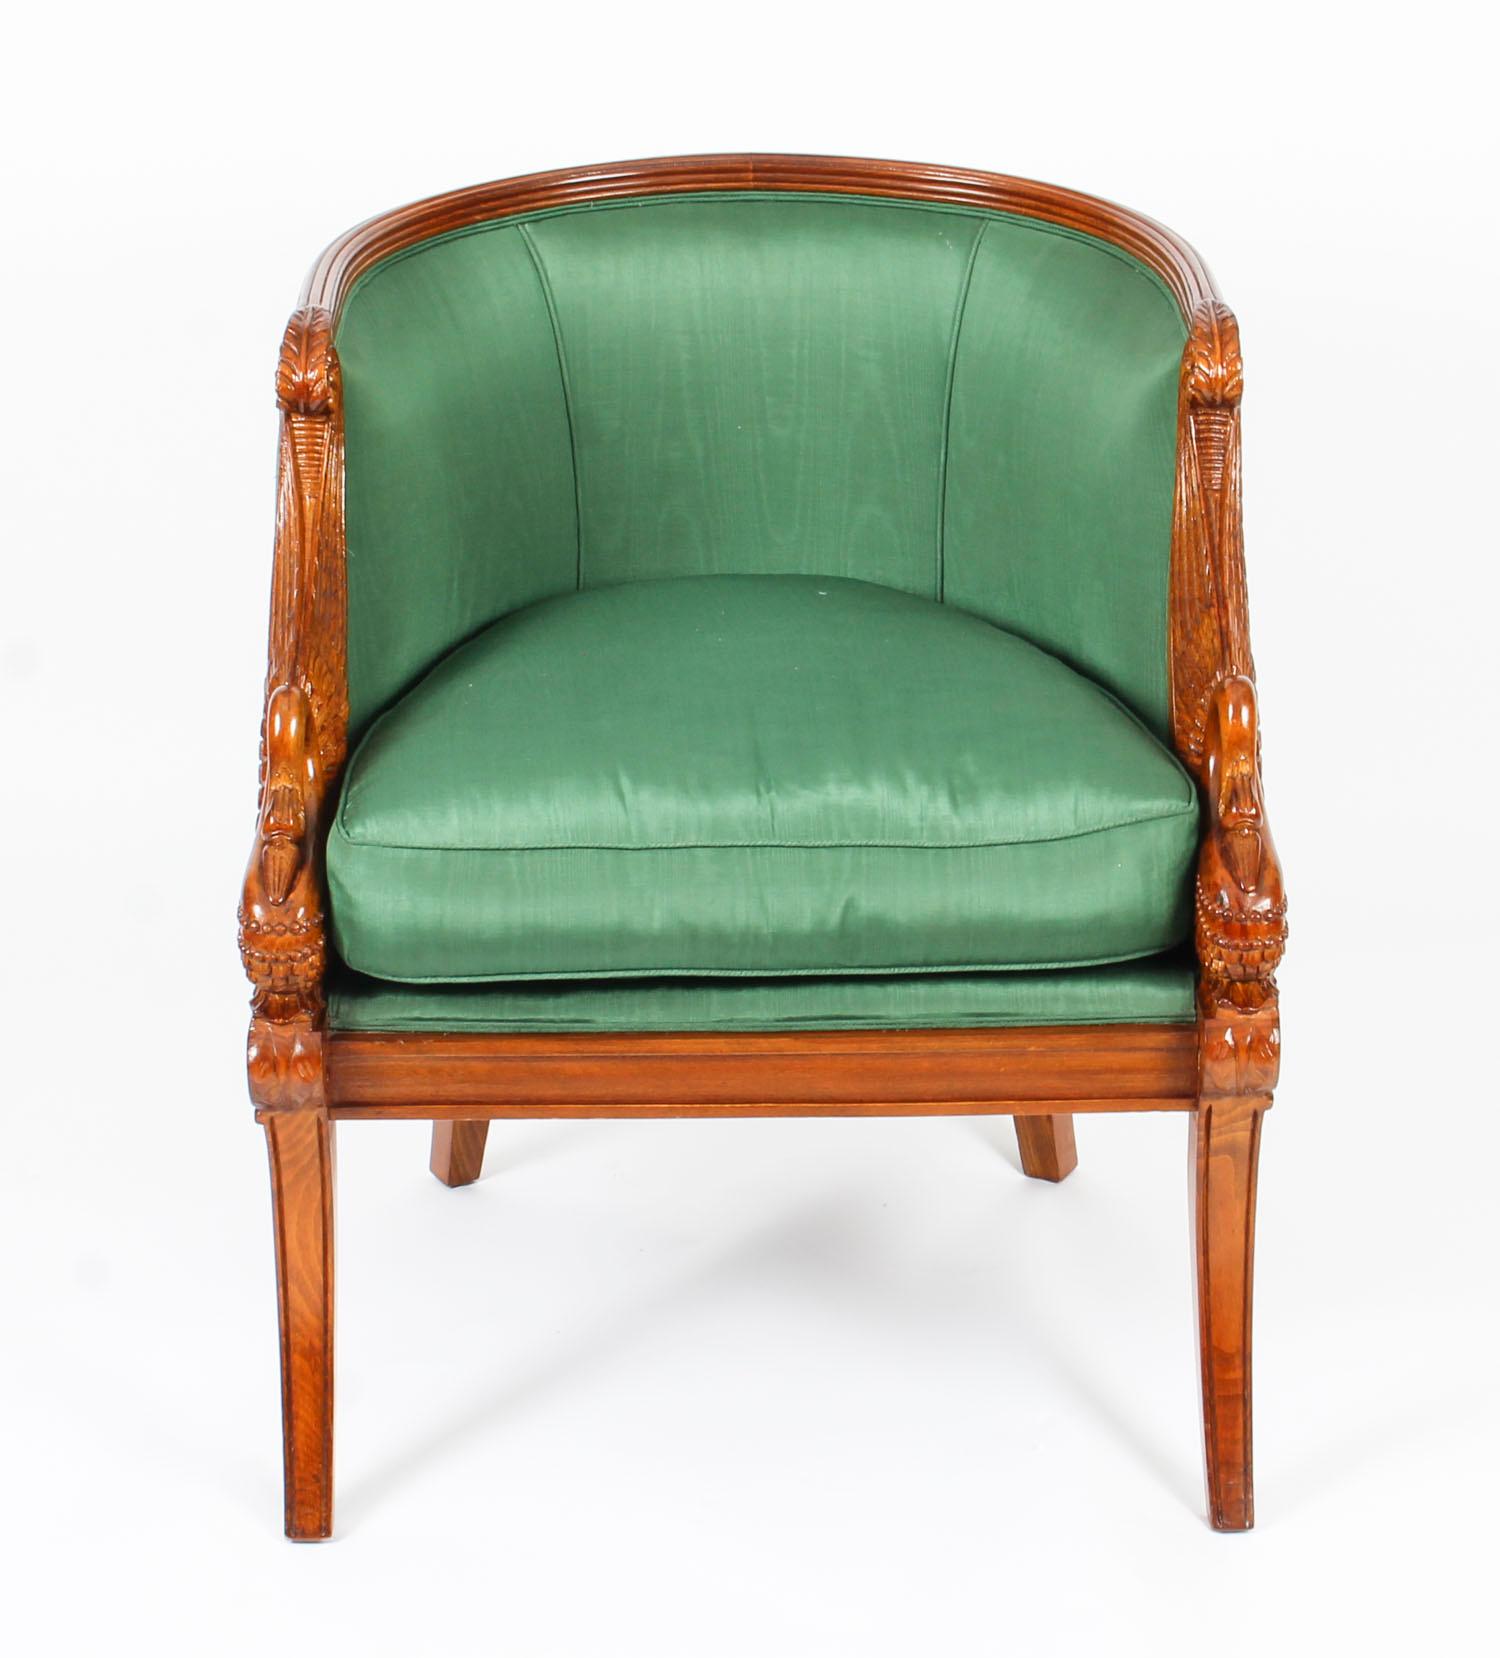 This is a wonderful pair of hand carved solid walnut French Empire Revival armchairs, dating from the second half of the 20th century.

They have beautifully carved swan armrests and raised on front sabre legs.

They are beautifully upholstered in